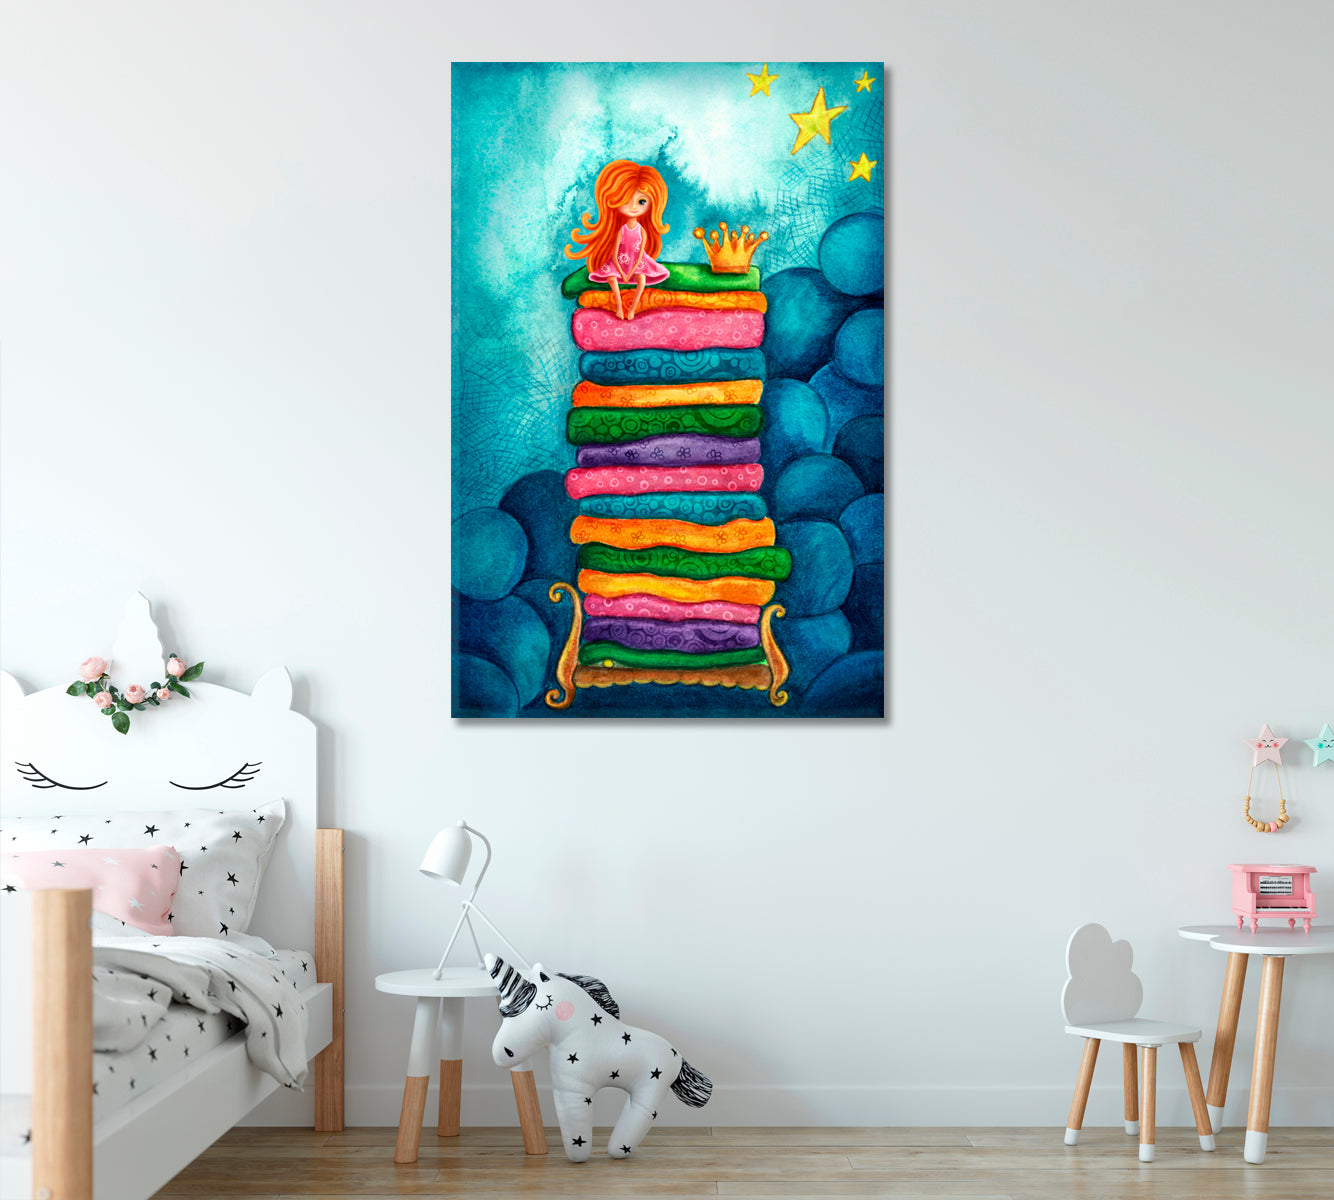 Princess and the Pea Canvas Print ArtLexy 1 Panel 16"x24" inches 